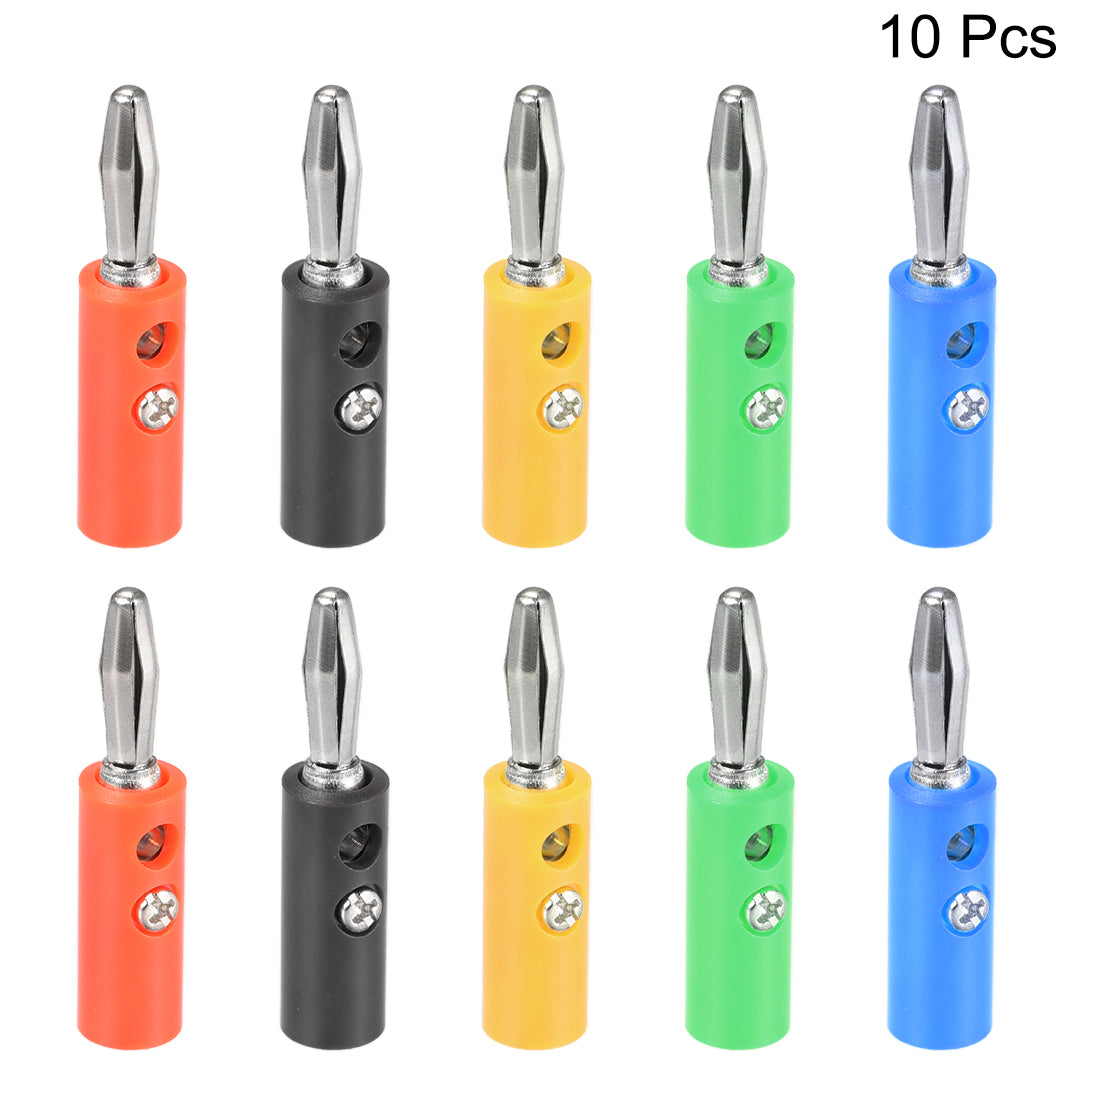 uxcell Uxcell 4mm Banana Speaker Wire Cable Screw Plugs Connectors  5-Colors 10pcs Jack Connector